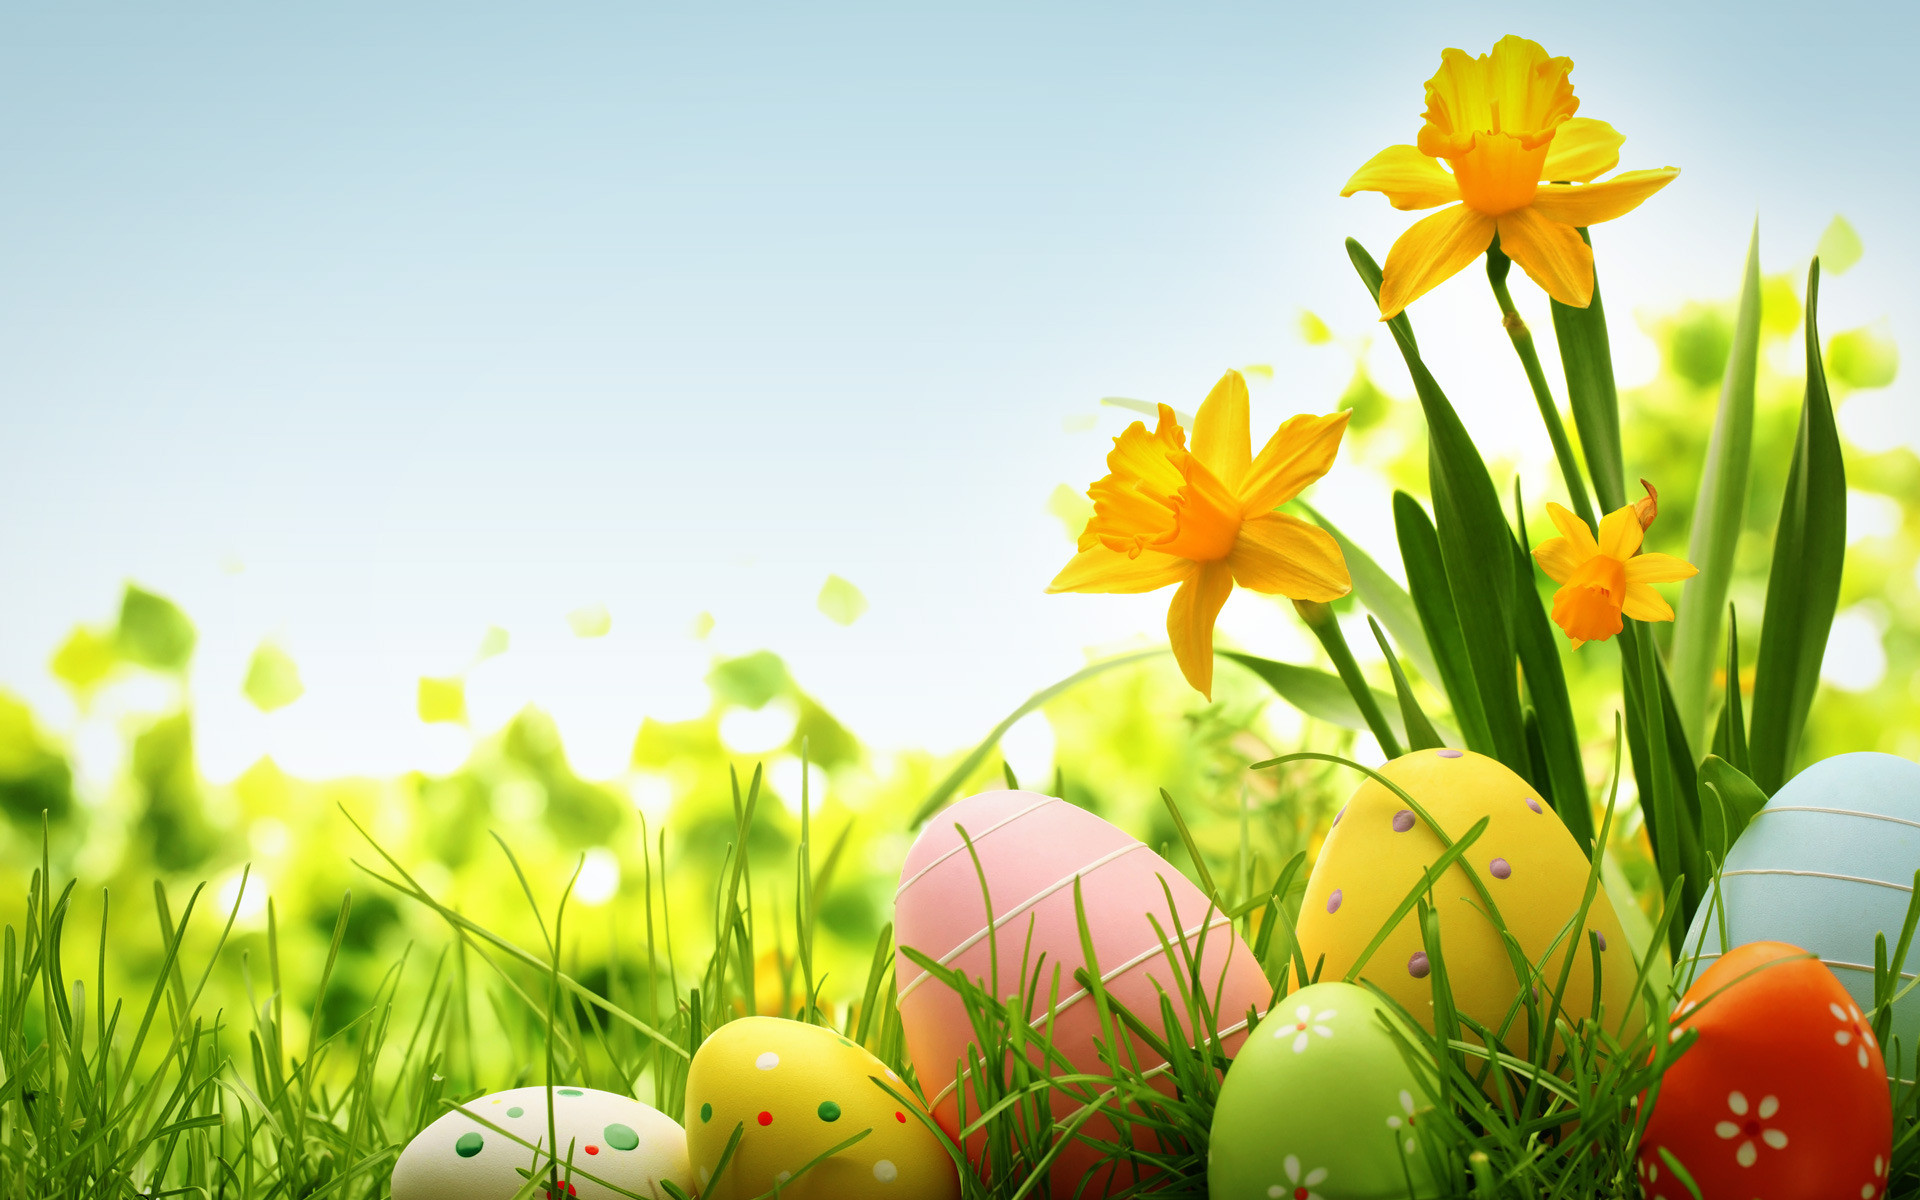 1920x1200 Colorful, Easter, Eggs, Holiday, Hd, Wallpaper, Free Stock Photos, Desktop  Images, Iphone Wallpaper, Samsung Wallpaper, Windows Wallpaper, Colorful,  ...